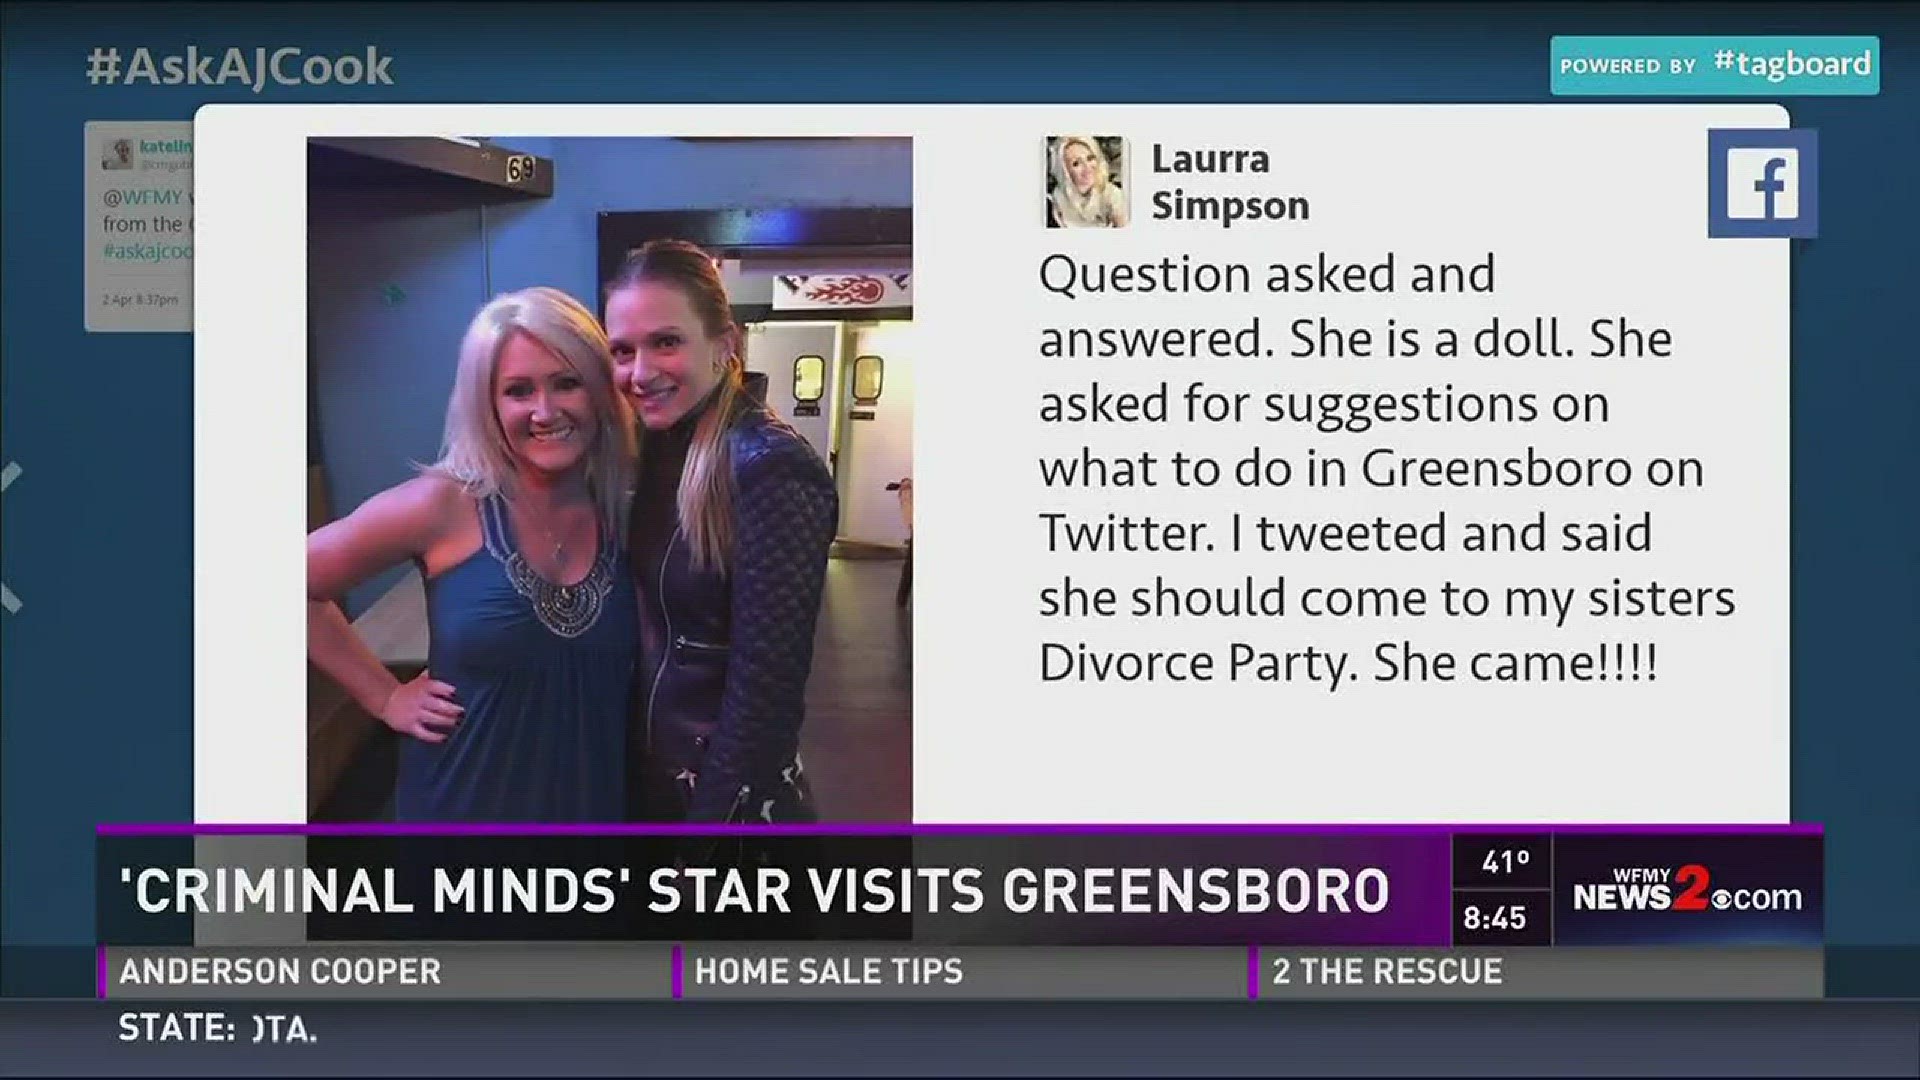 The Criminal Minds star's night in Greensboro.